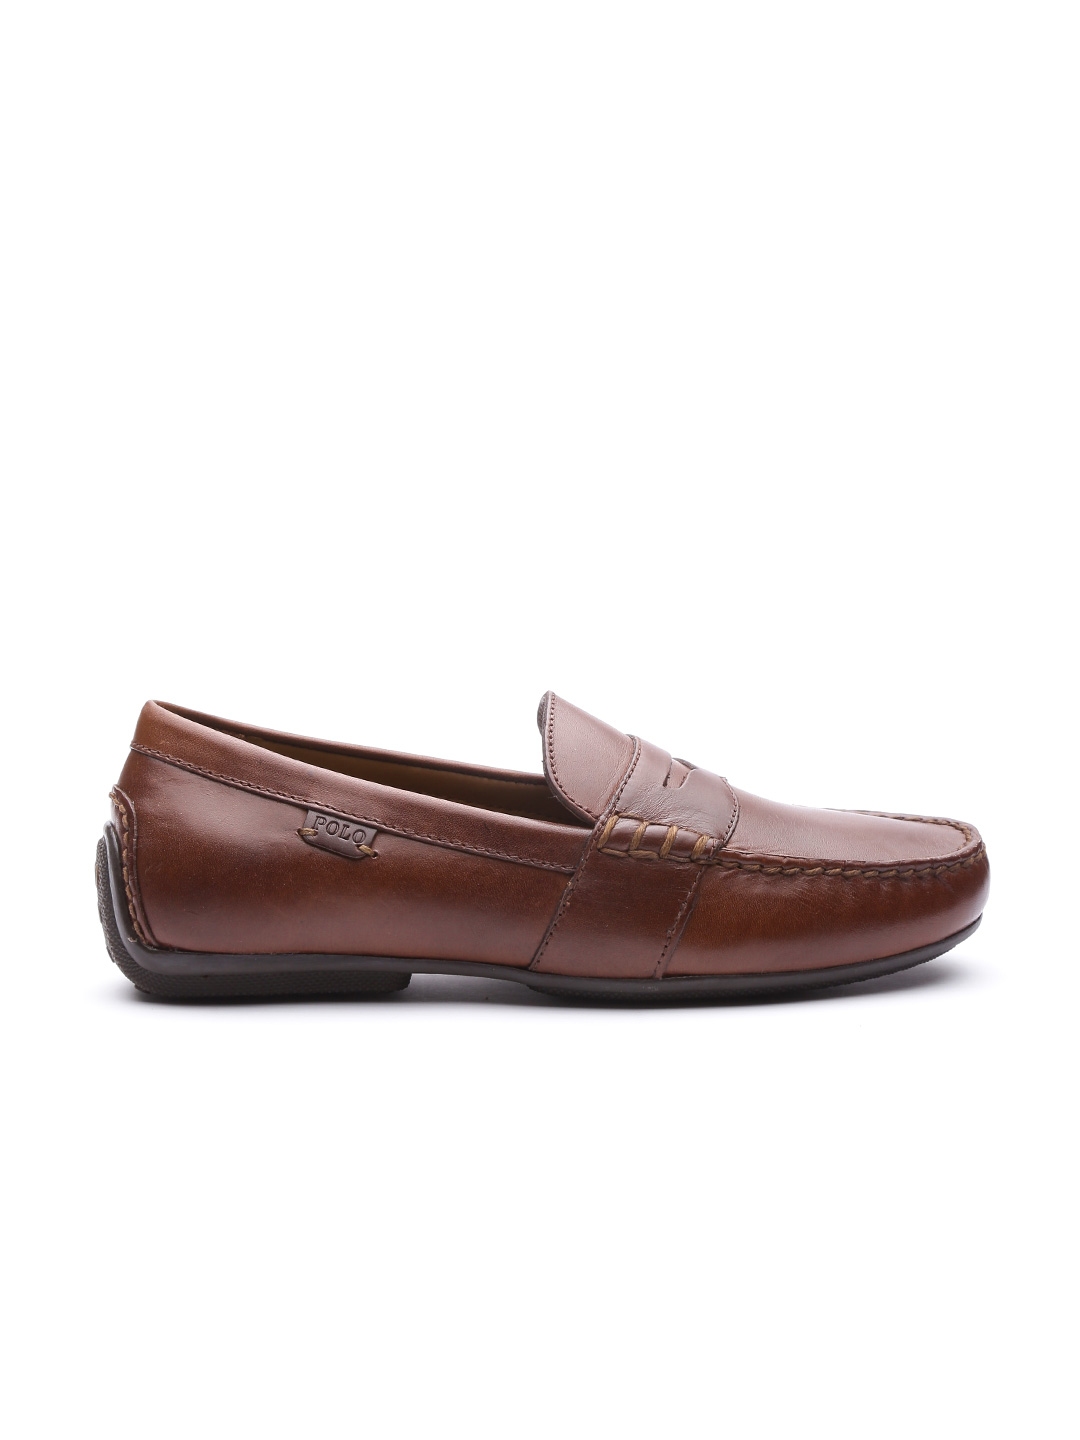 Buy Polo Ralph Lauren Men Brown Solid Leather Driving Shoes - Casual Shoes  for Men 9999359 | Myntra